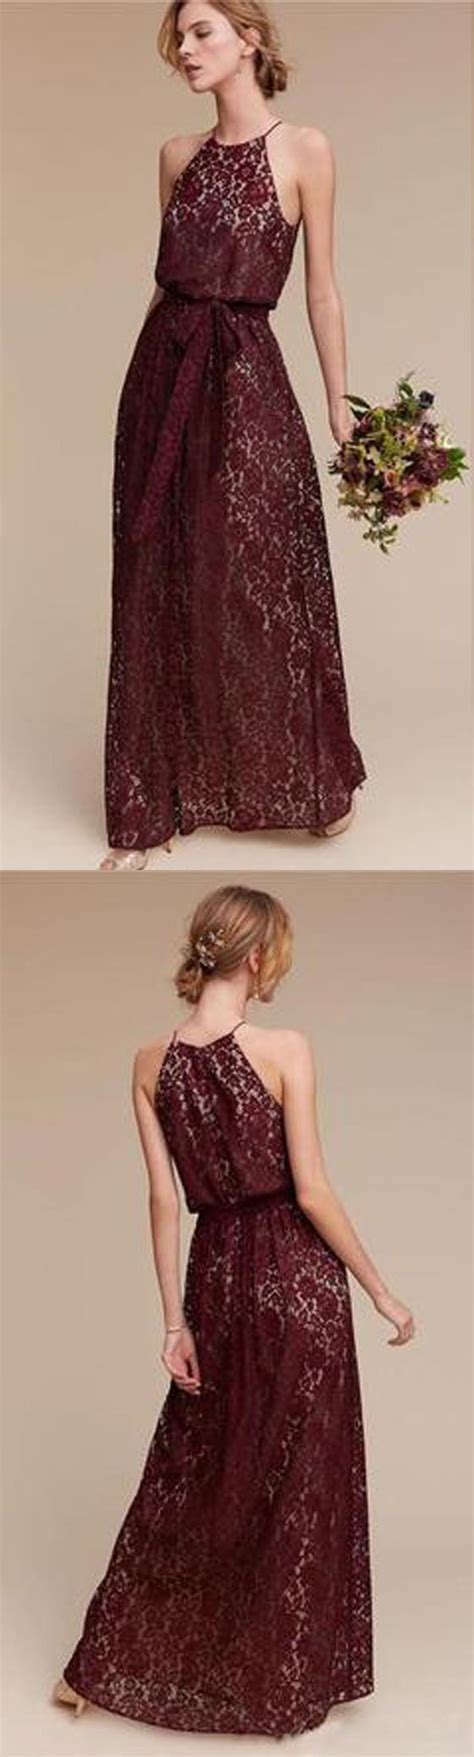 Lace Maroon Long Bridesmaid Dresses For Wedding Party Pm0812